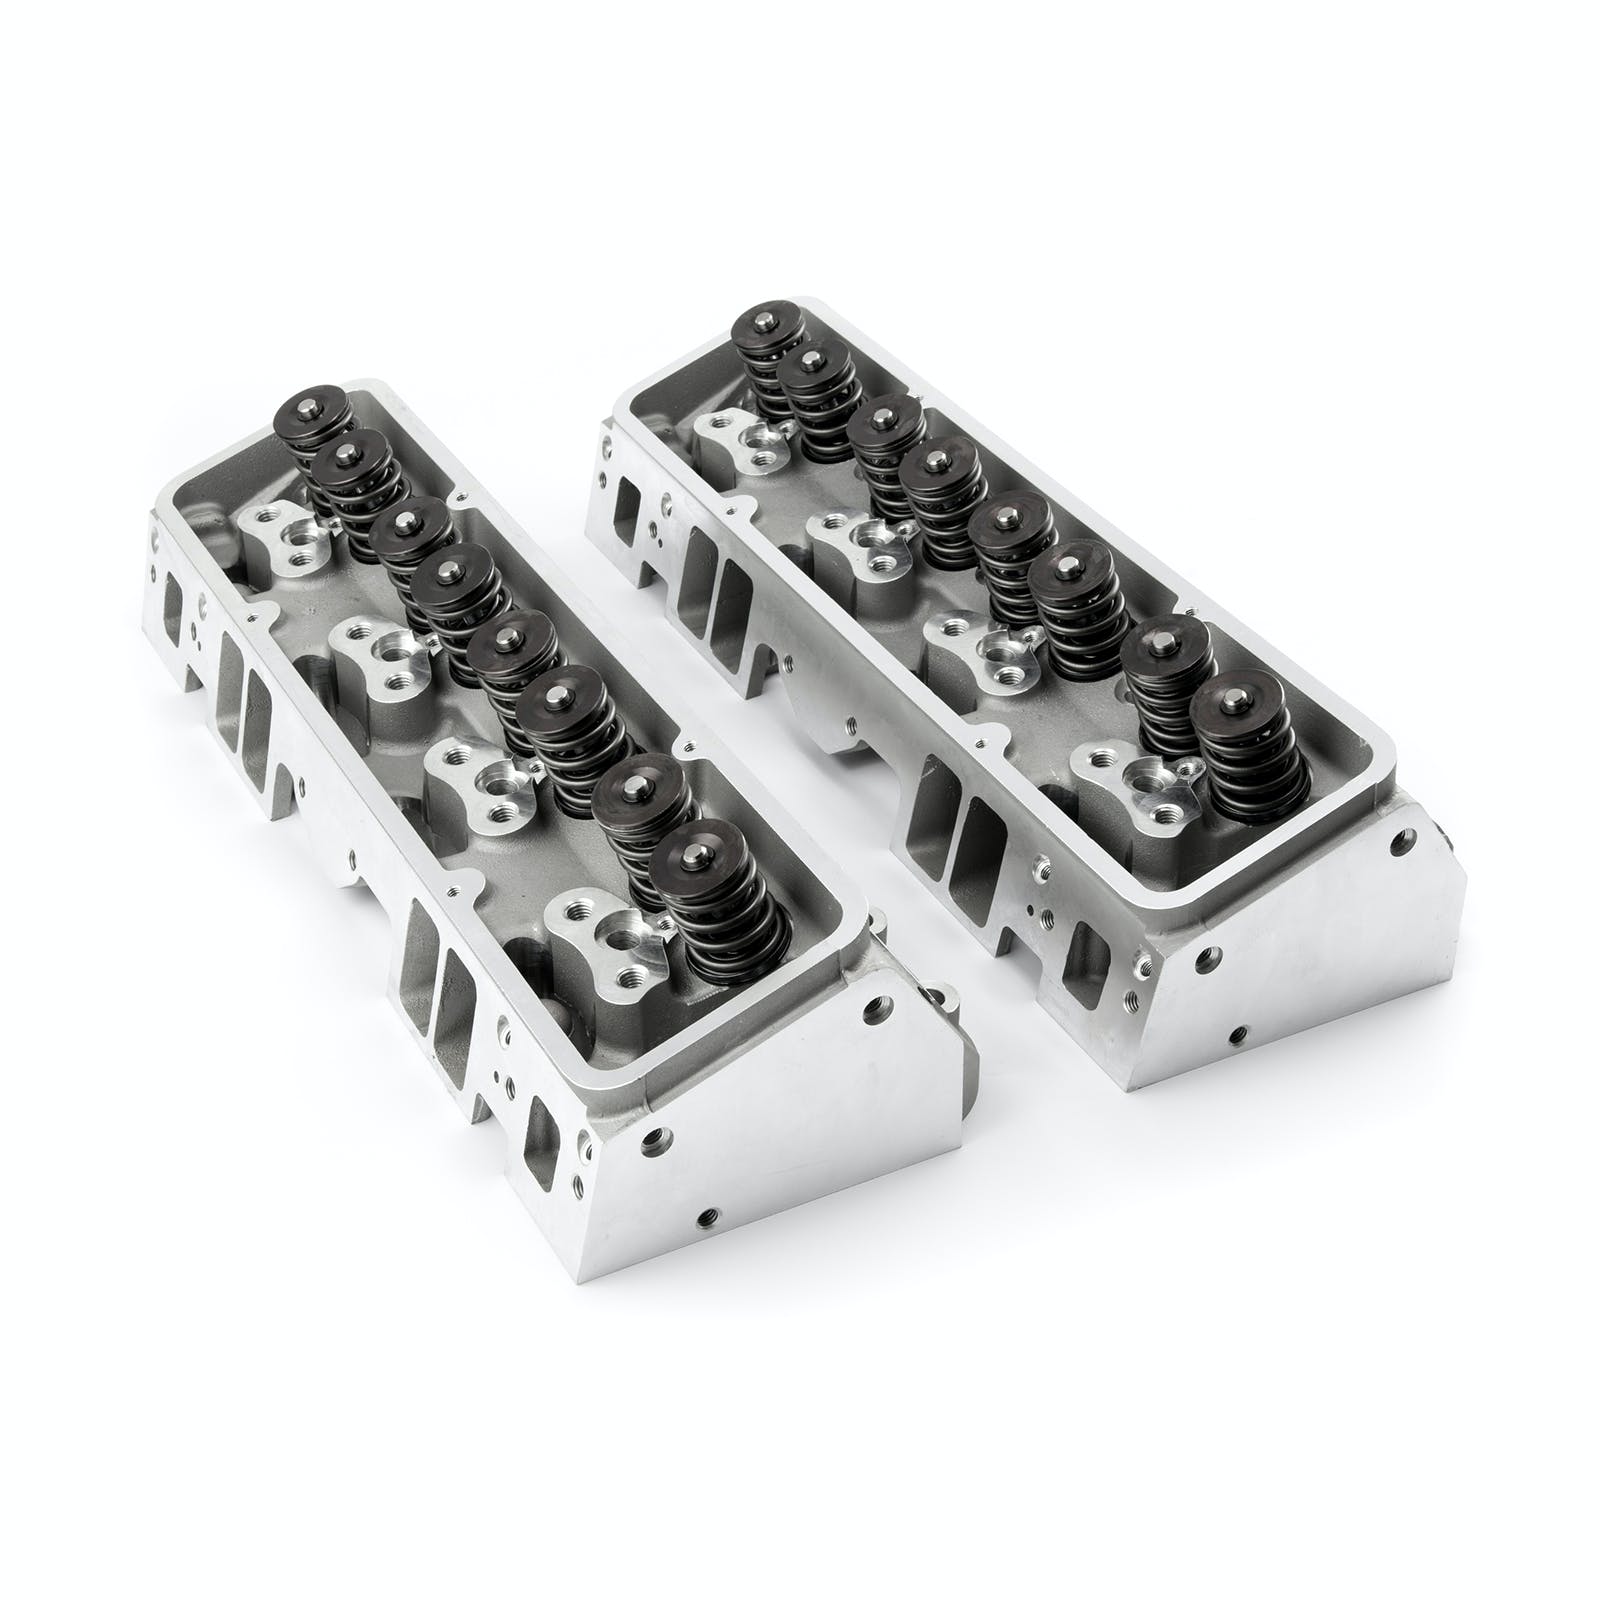 Speedmaster PCE281.2011 205cc 64cc Straight Solid-FT Complete Aluminum Cylinder Heads